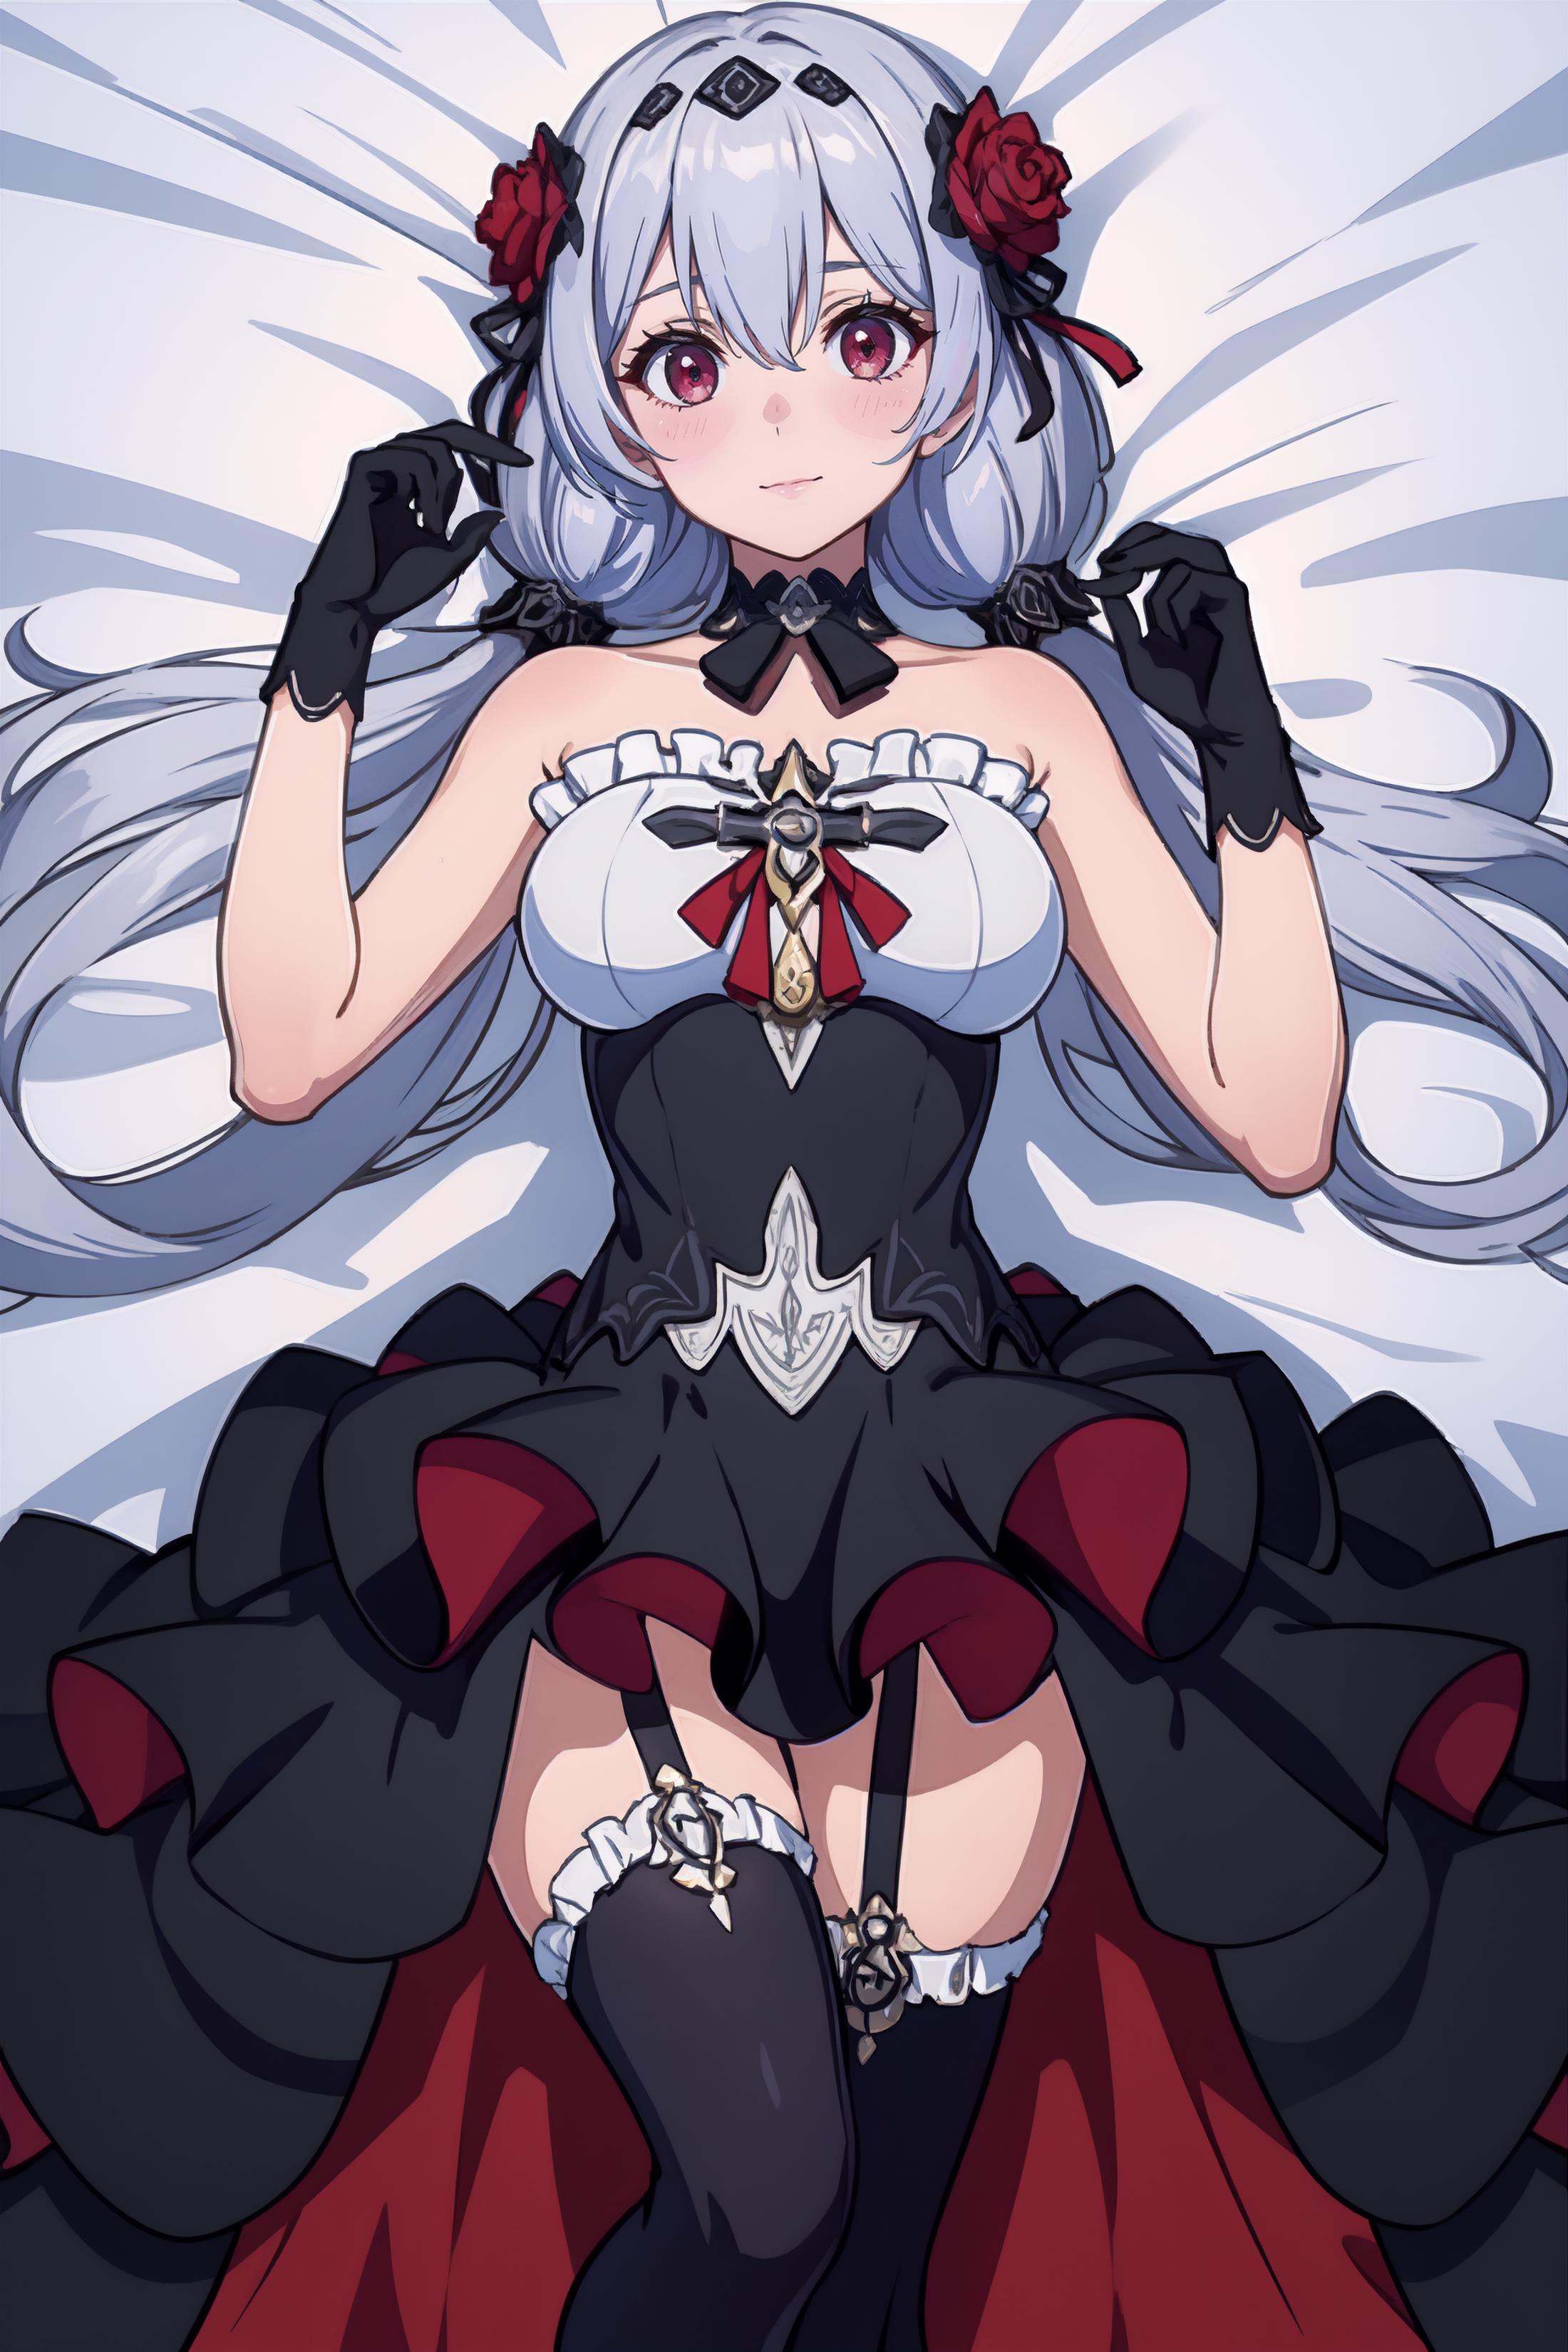 Luna Kindred 月下初擁 | Honkai Impact 3rd image by user_not_found539